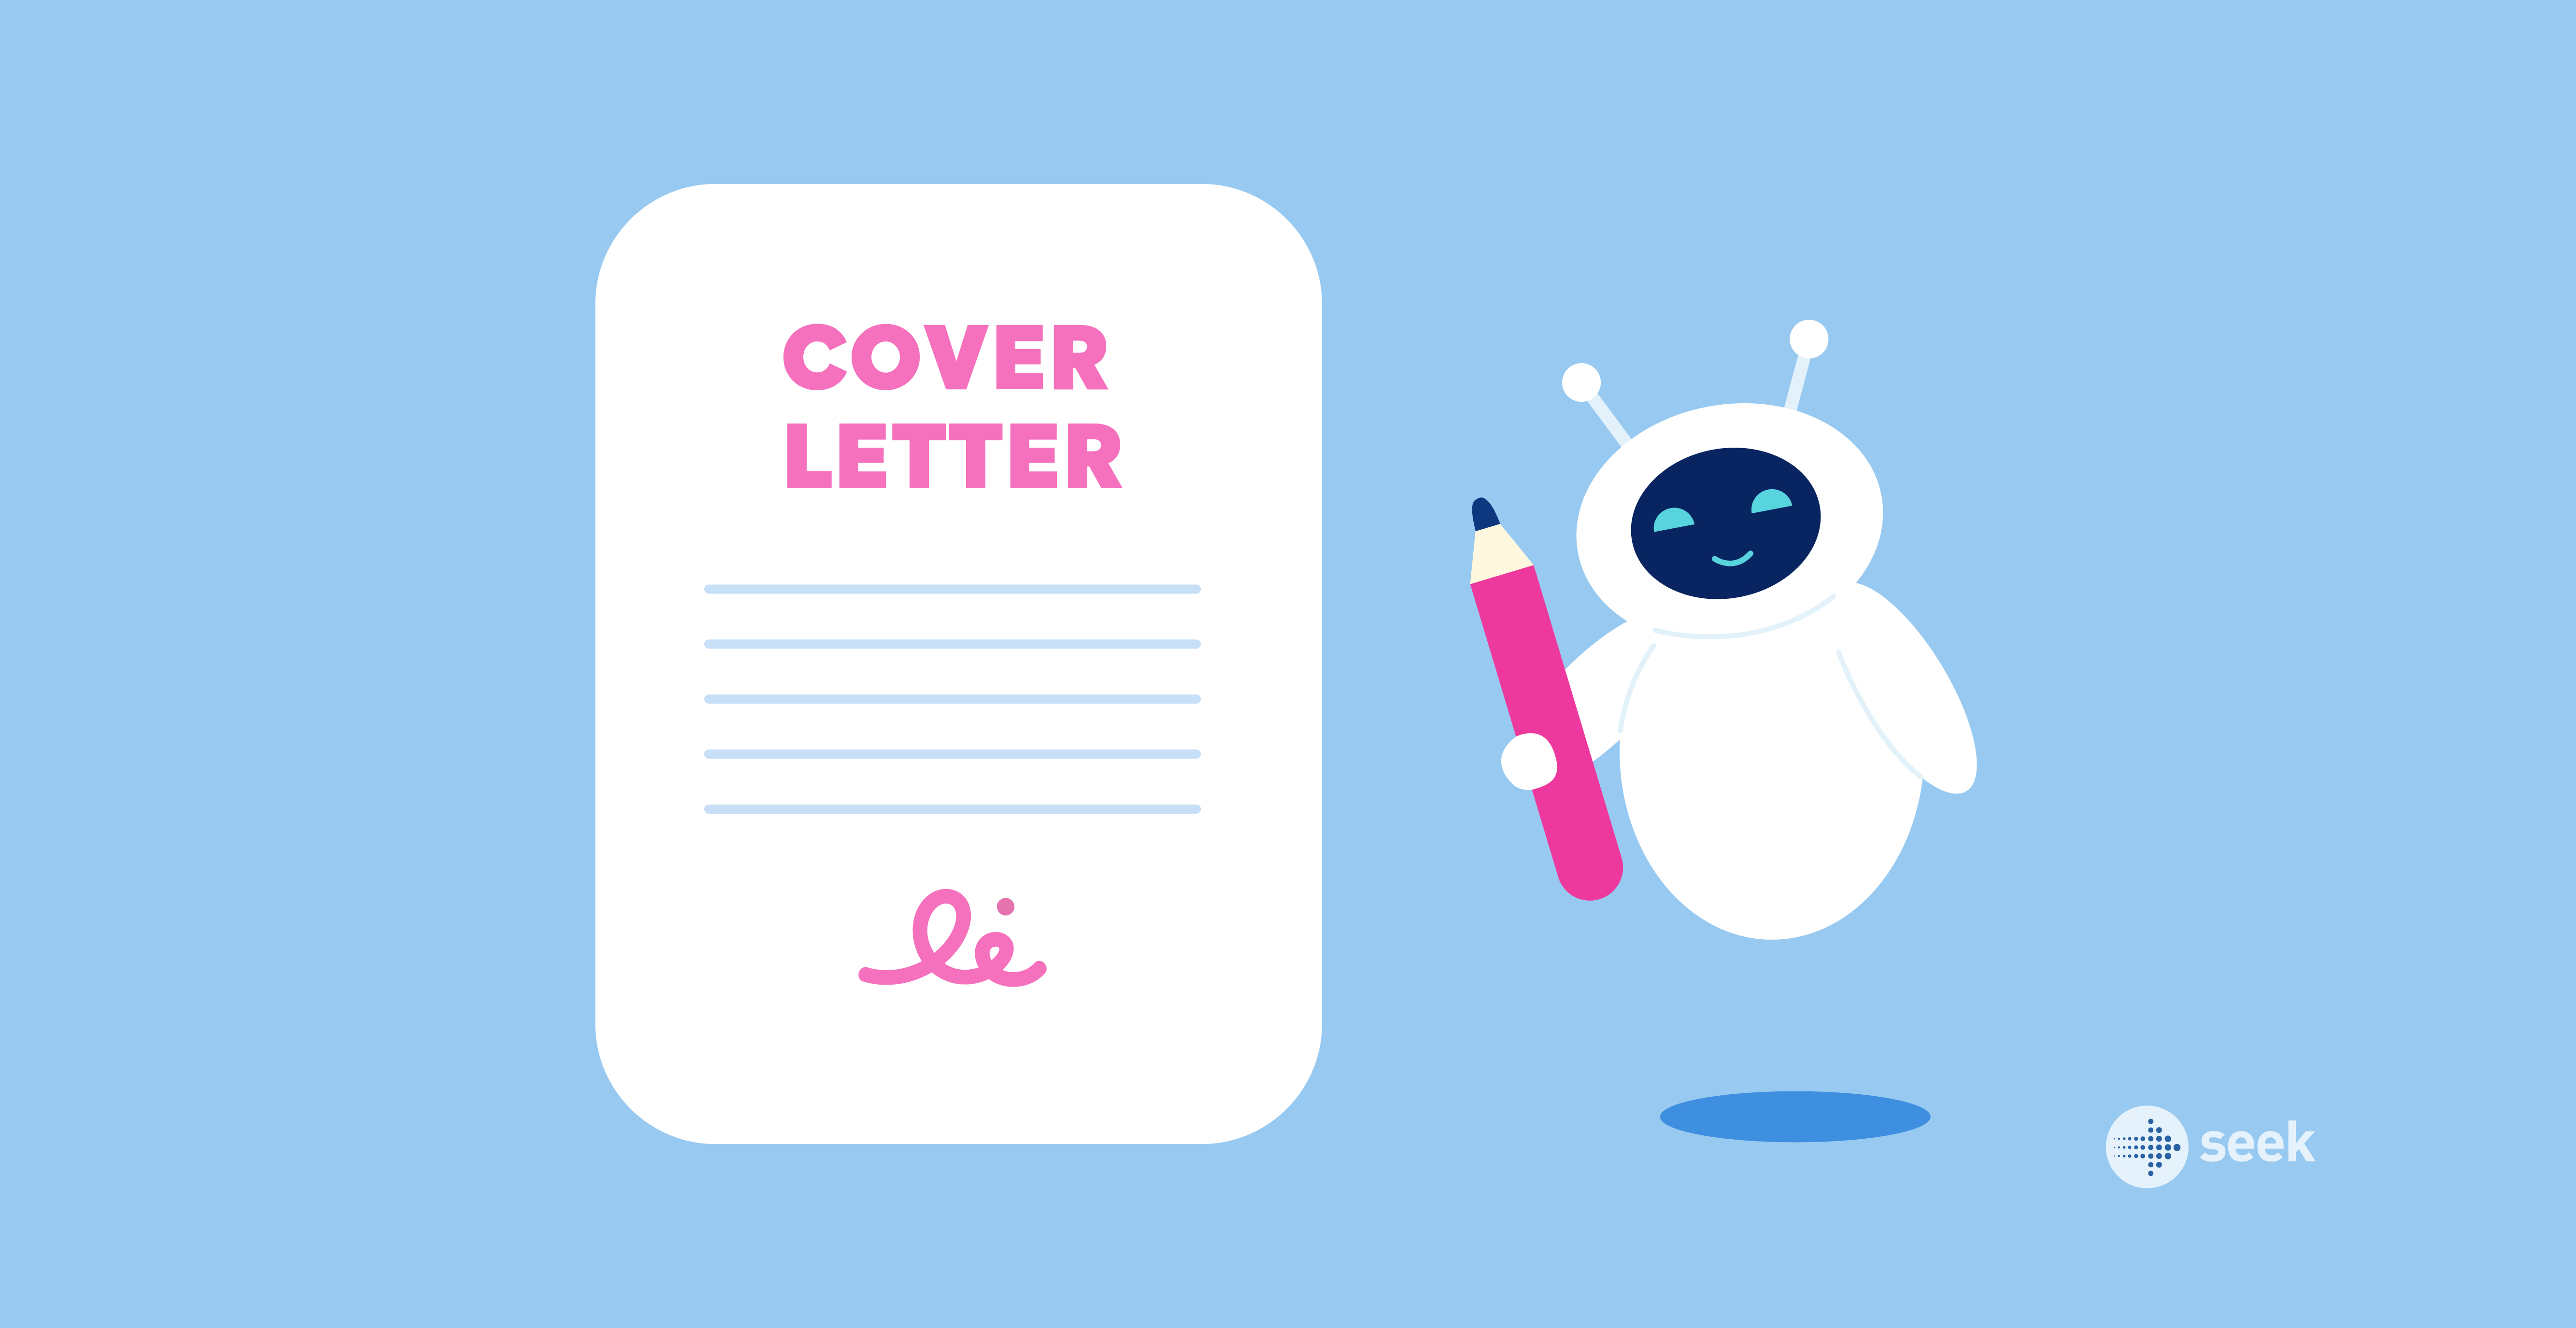 How to write a cover letter using AI